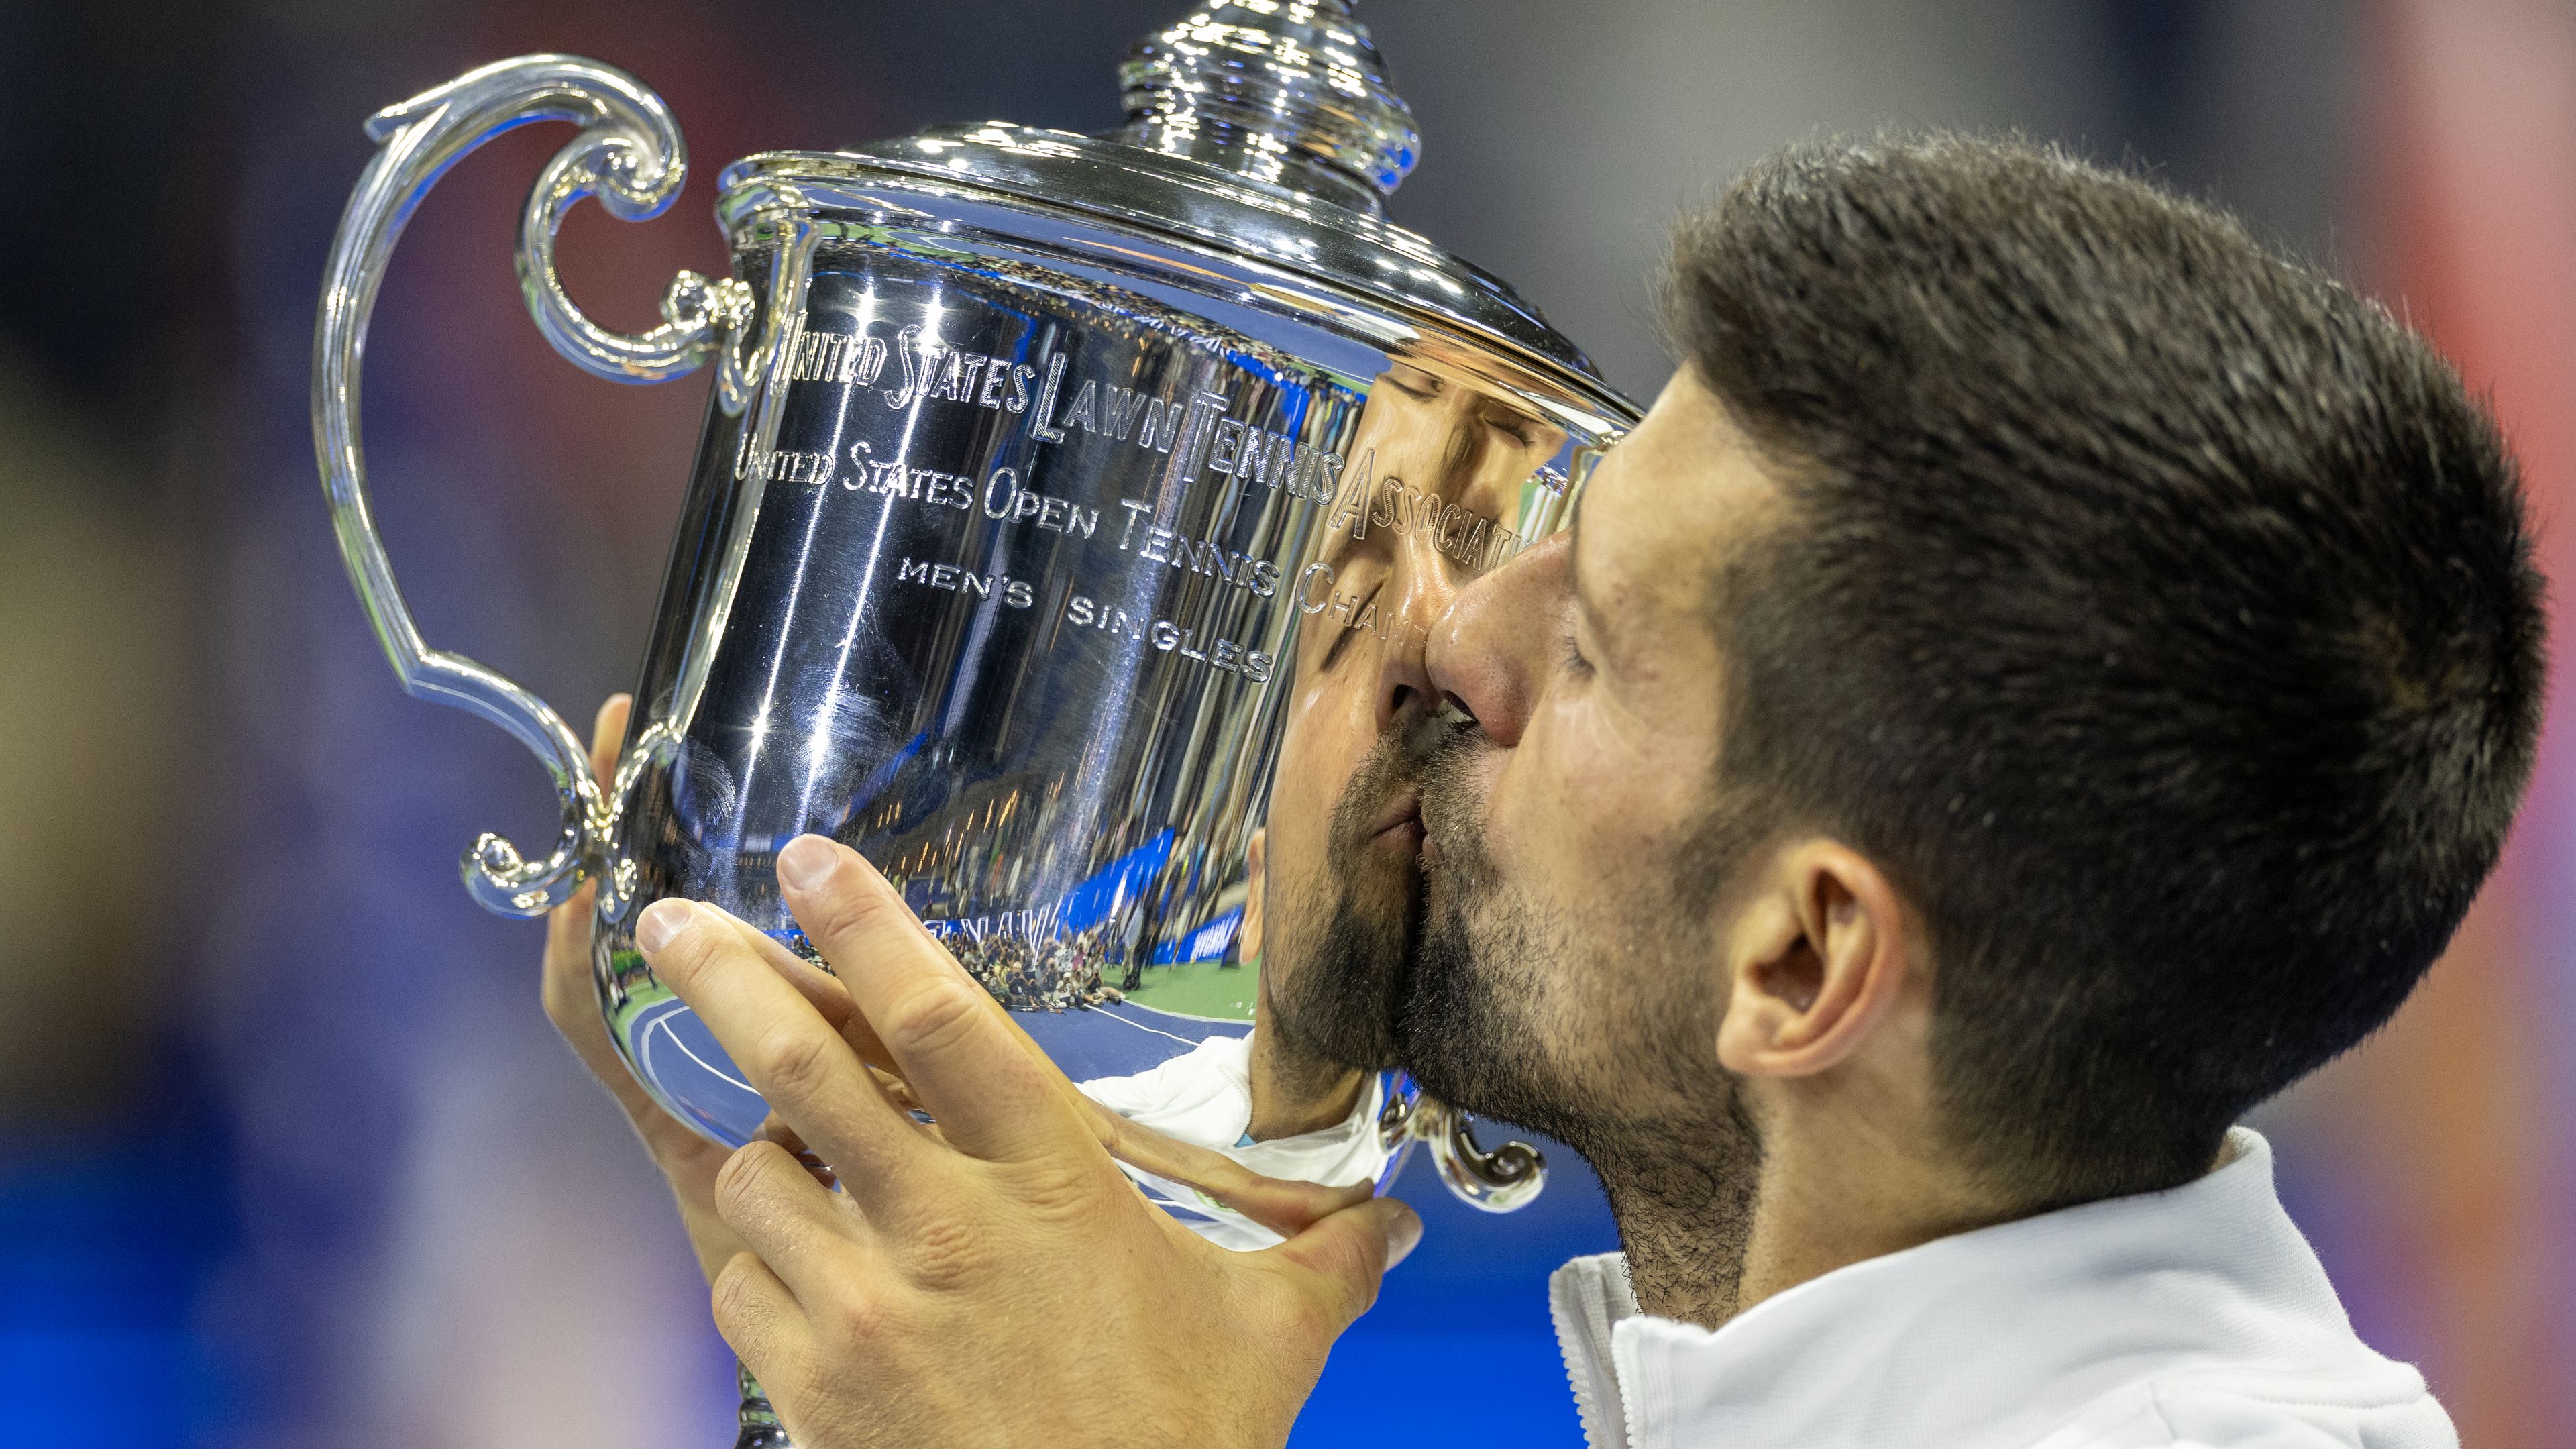 Novak Djokovic of Serbia with the winner&#x27;s trophy after his victory against Daniil Medvedev of Russia in the Men&#x27;s Singles Final on Arthur Ashe Stadium during the US Open Tennis Championship 2023 at the USTA National Tennis Centre on September 10th, 2023 in Flushing, Queens, New York City.  (Photo by Tim Clayton/Corbis via Getty Images)